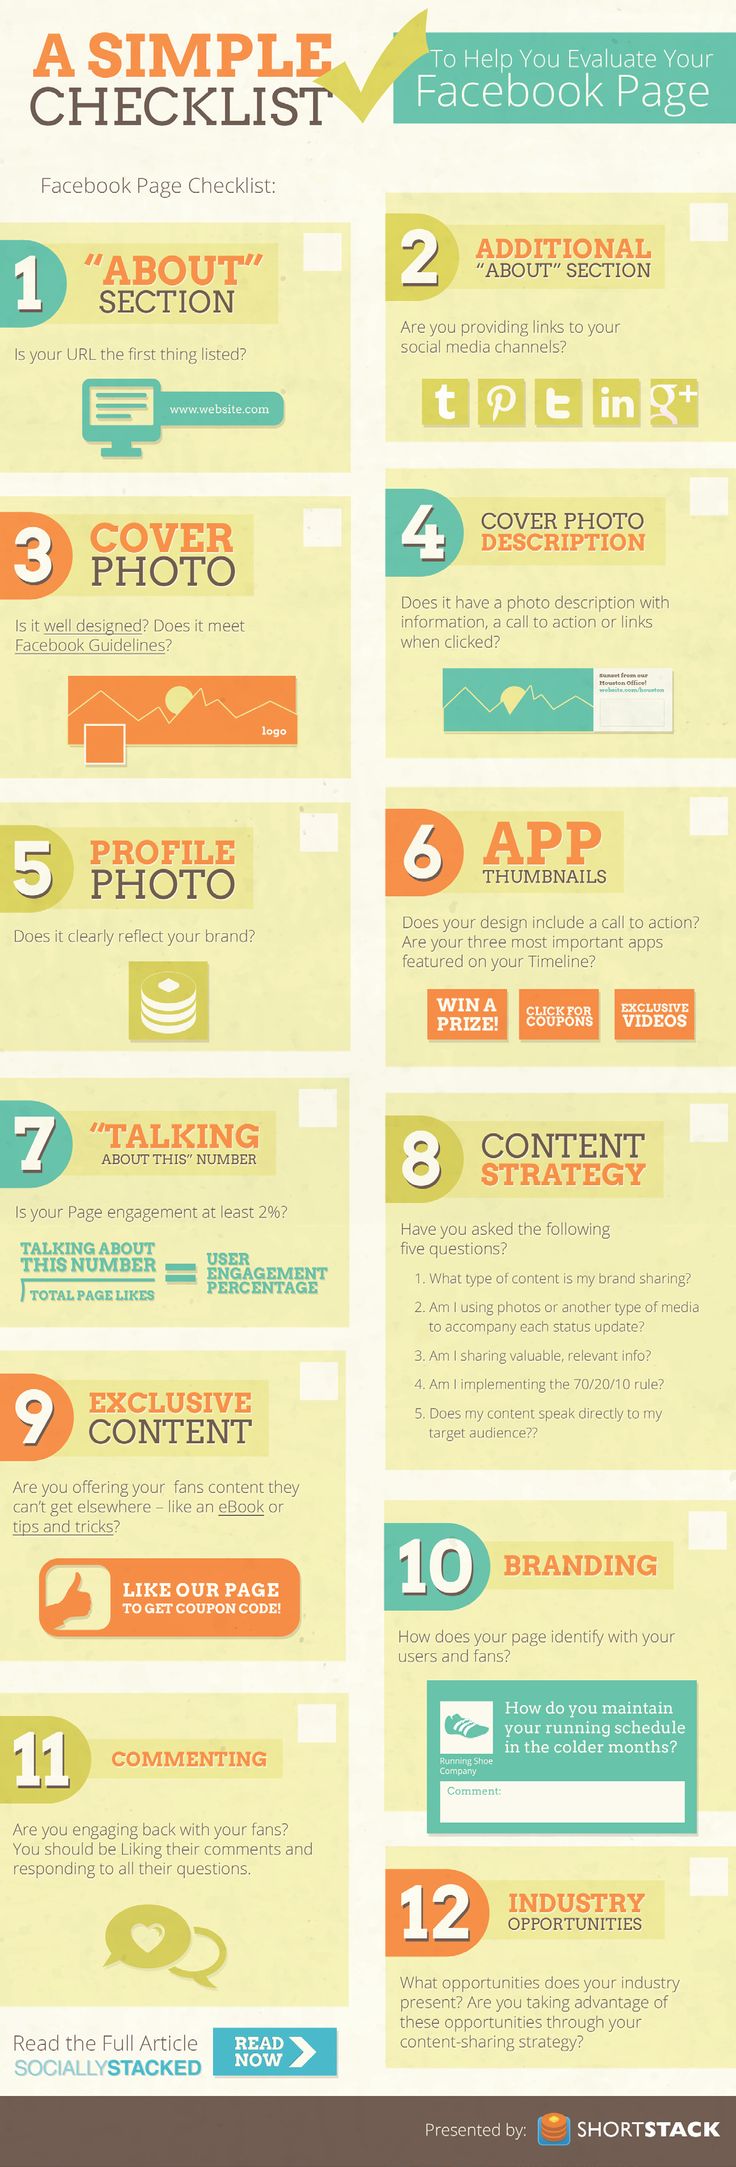 Marketing-Infographic-Infographic-Evaluate-Your-Facebook-Page-With-This-Simple-Checklist.-With-ne Marketing Infographic : #Infographic: Evaluate Your #Facebook Page With This Simple #Checklist.  With ne...